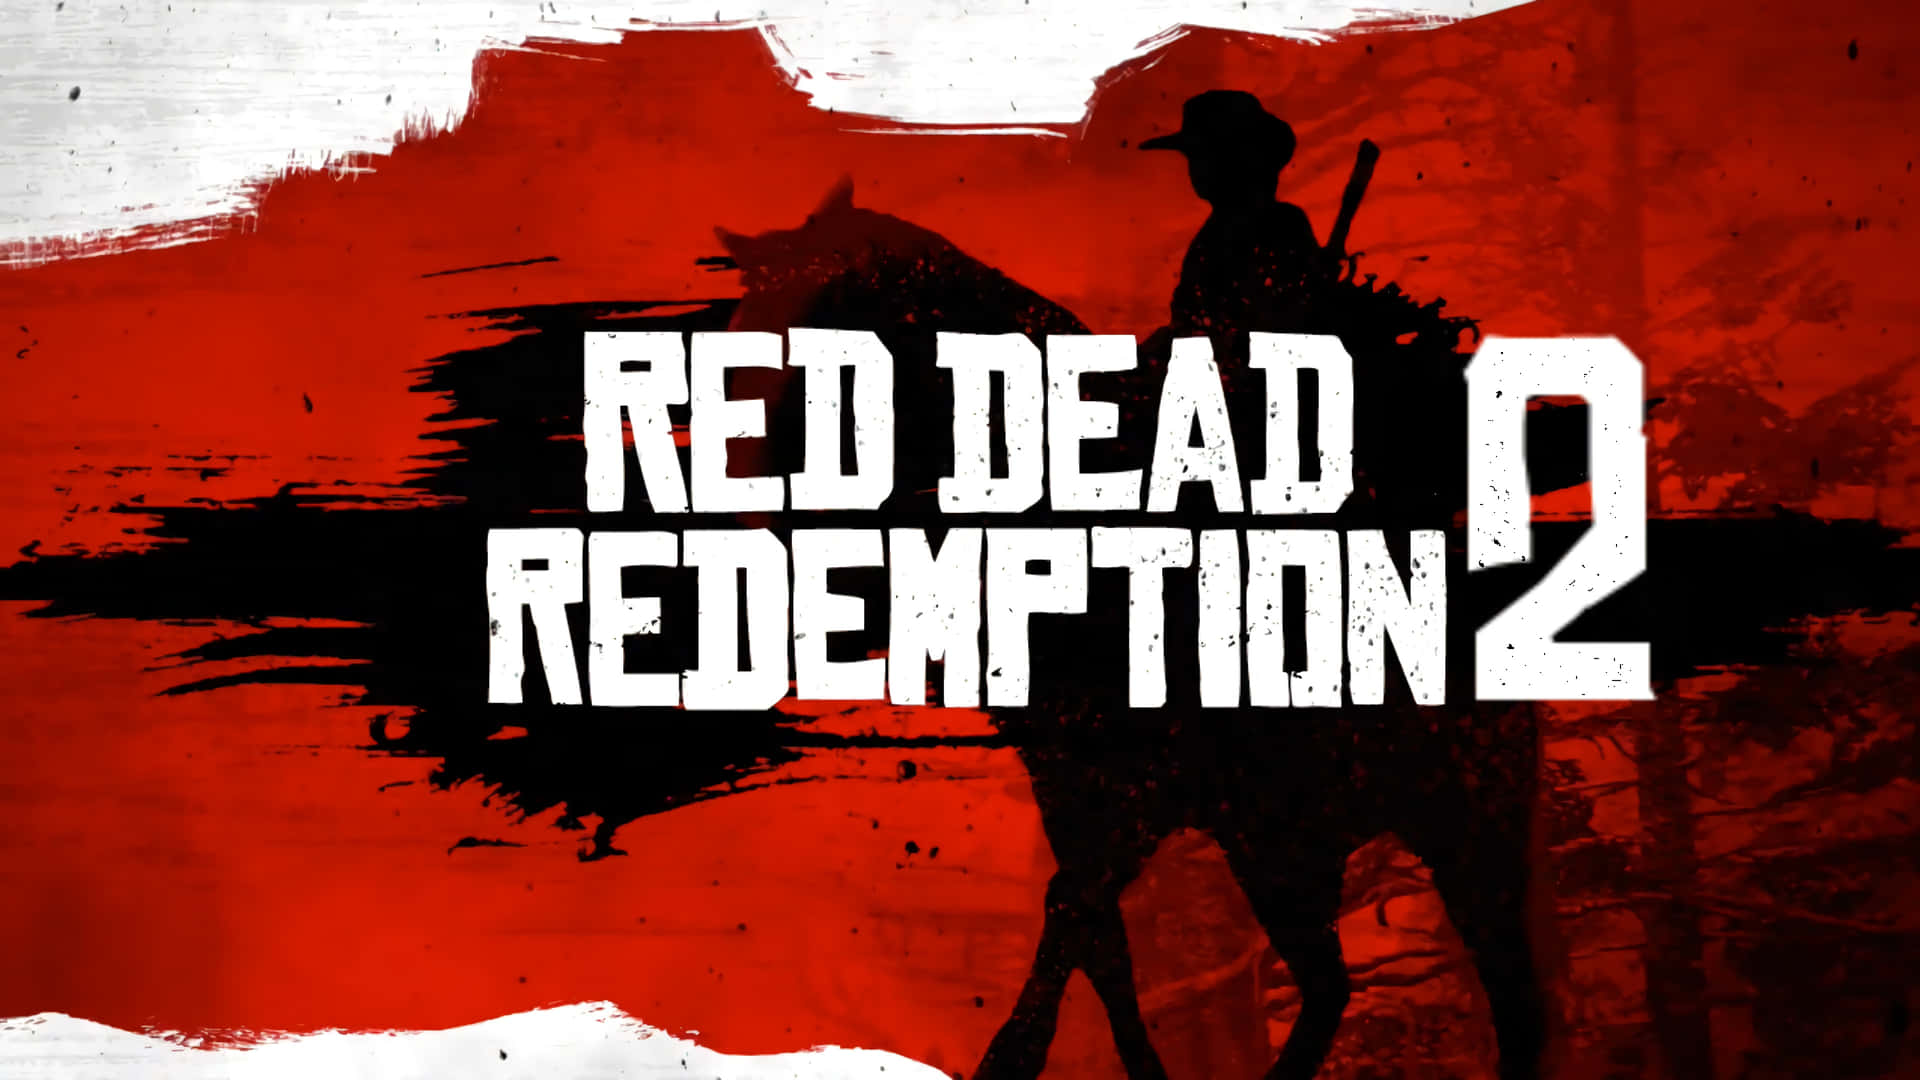 Red Dead Redemption 2 Poster Full Hd Wallpaper